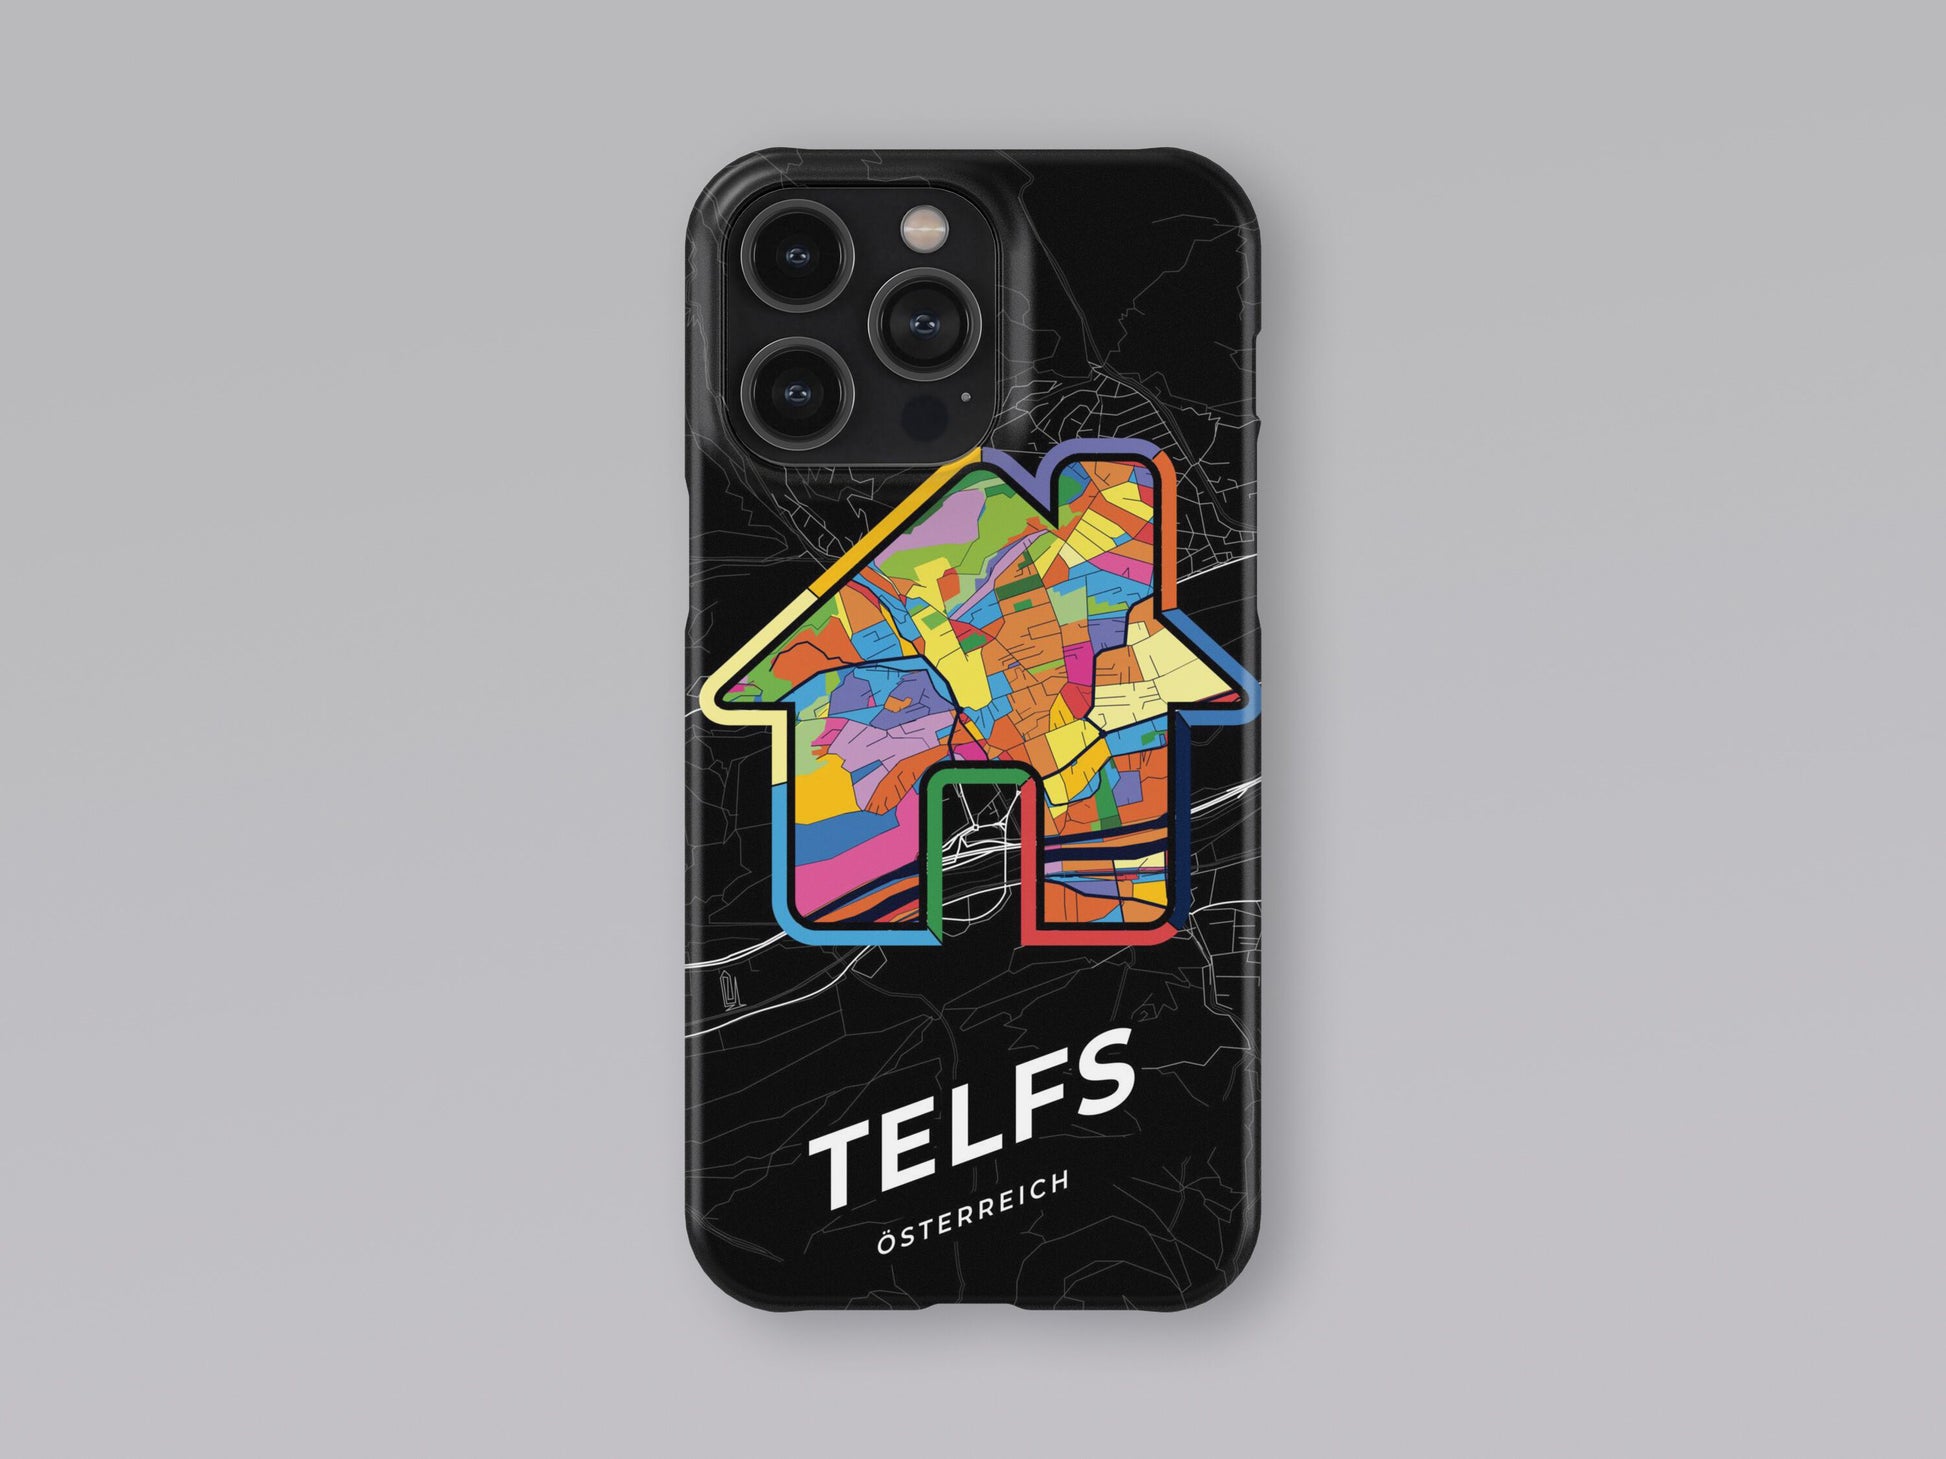 Telfs Österreich slim phone case with colorful icon. Birthday, wedding or housewarming gift. Couple match cases. 3